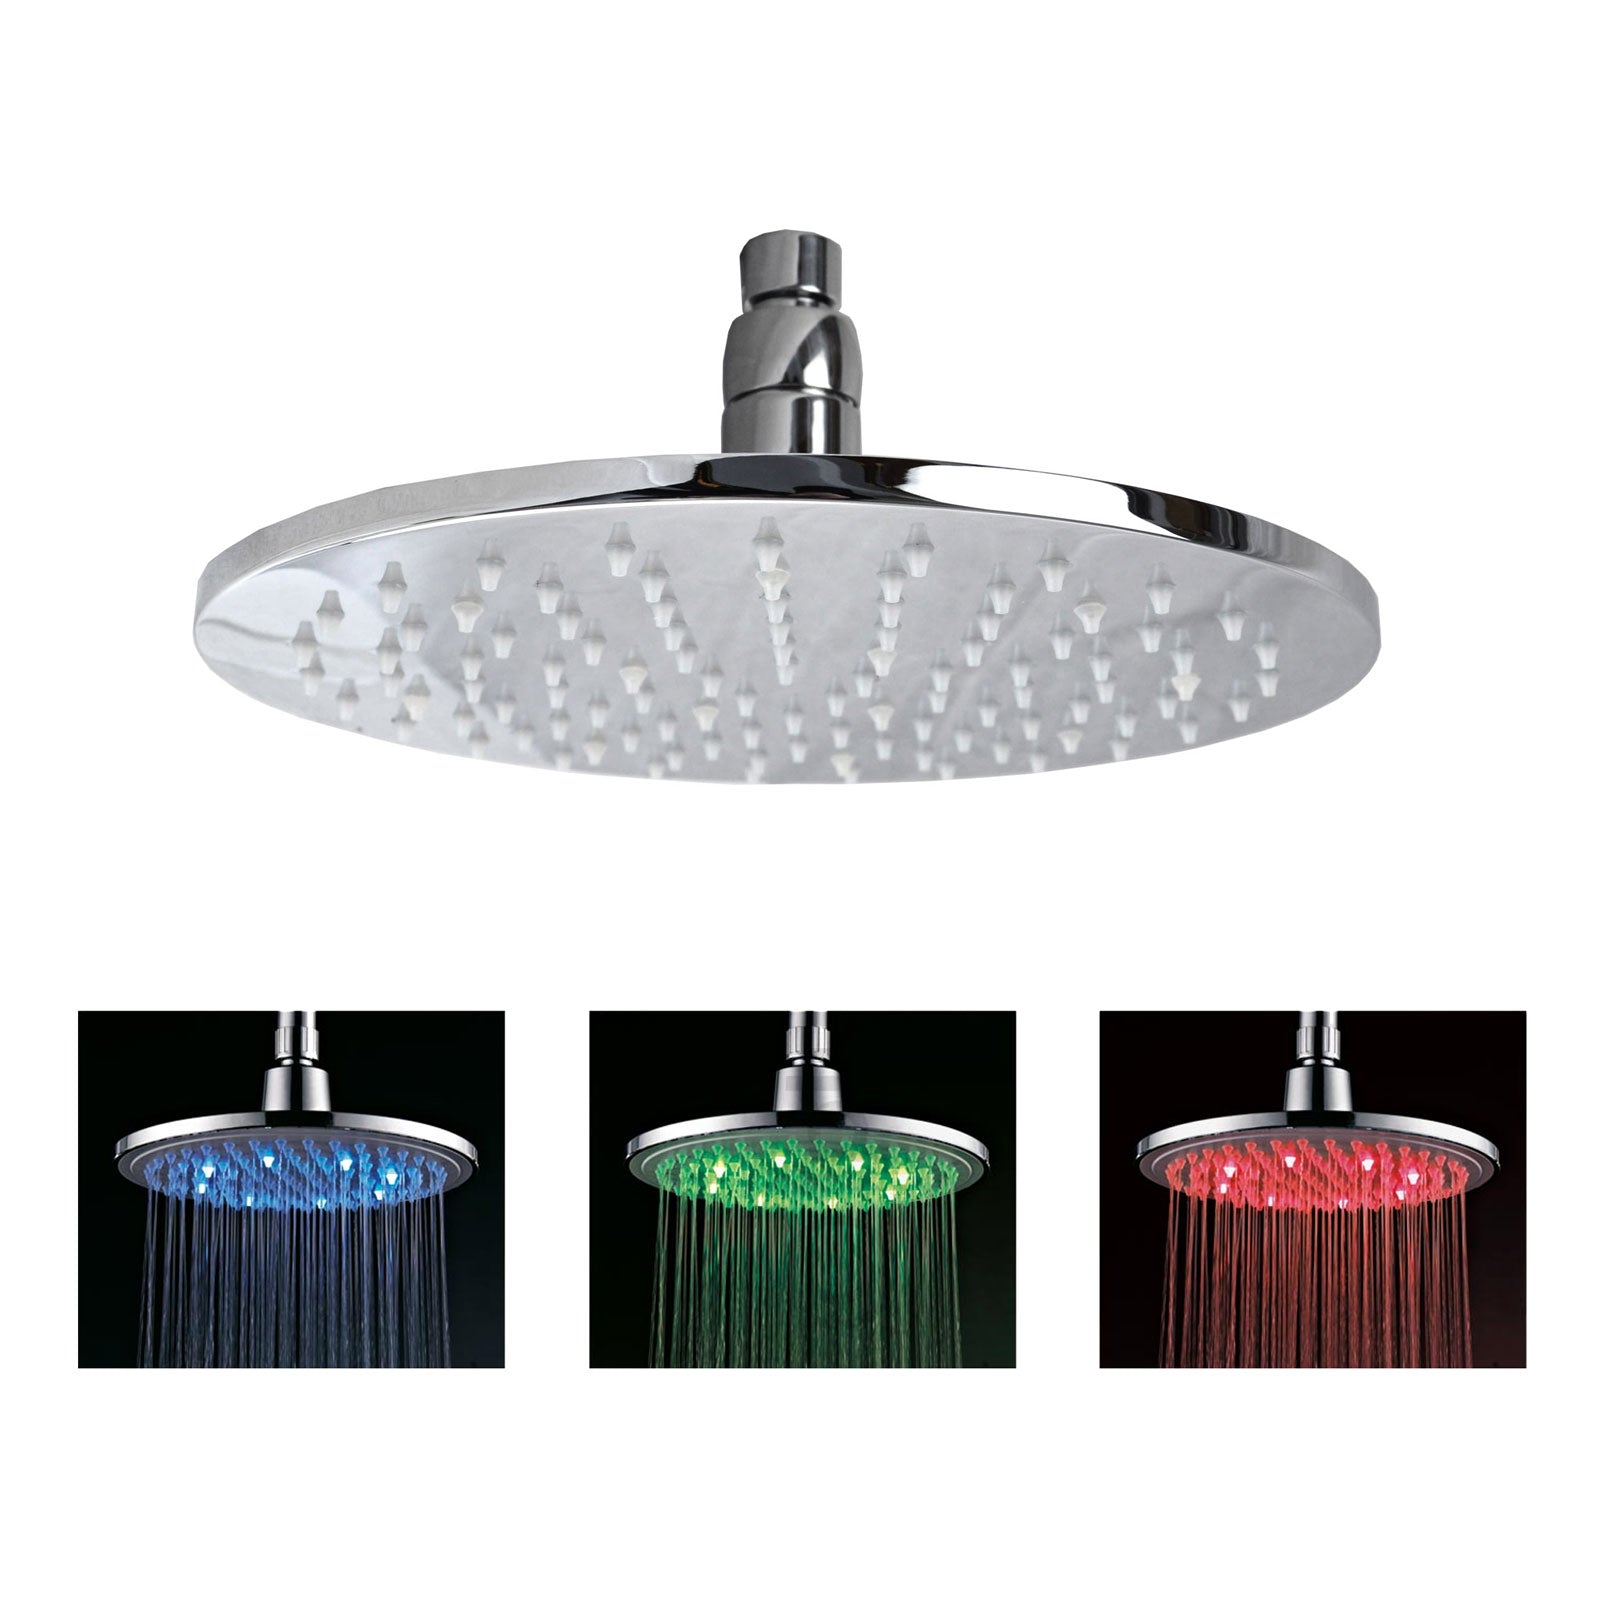 Round 300 Mm LED 3 Colour Changing Overhead Shower Head